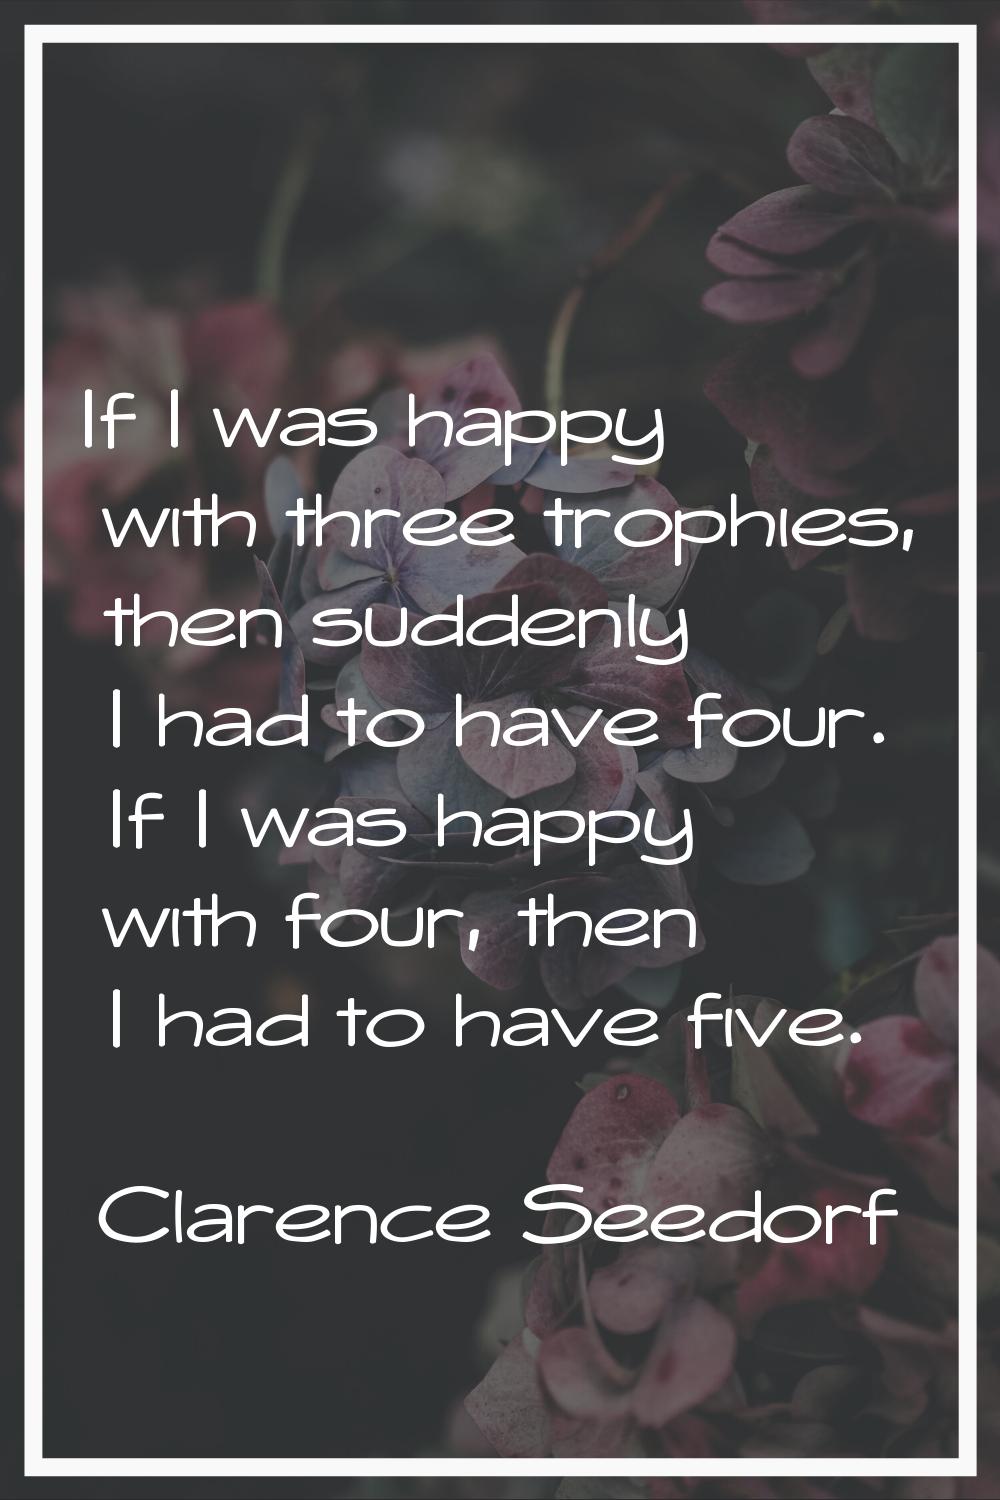 If I was happy with three trophies, then suddenly I had to have four. If I was happy with four, the